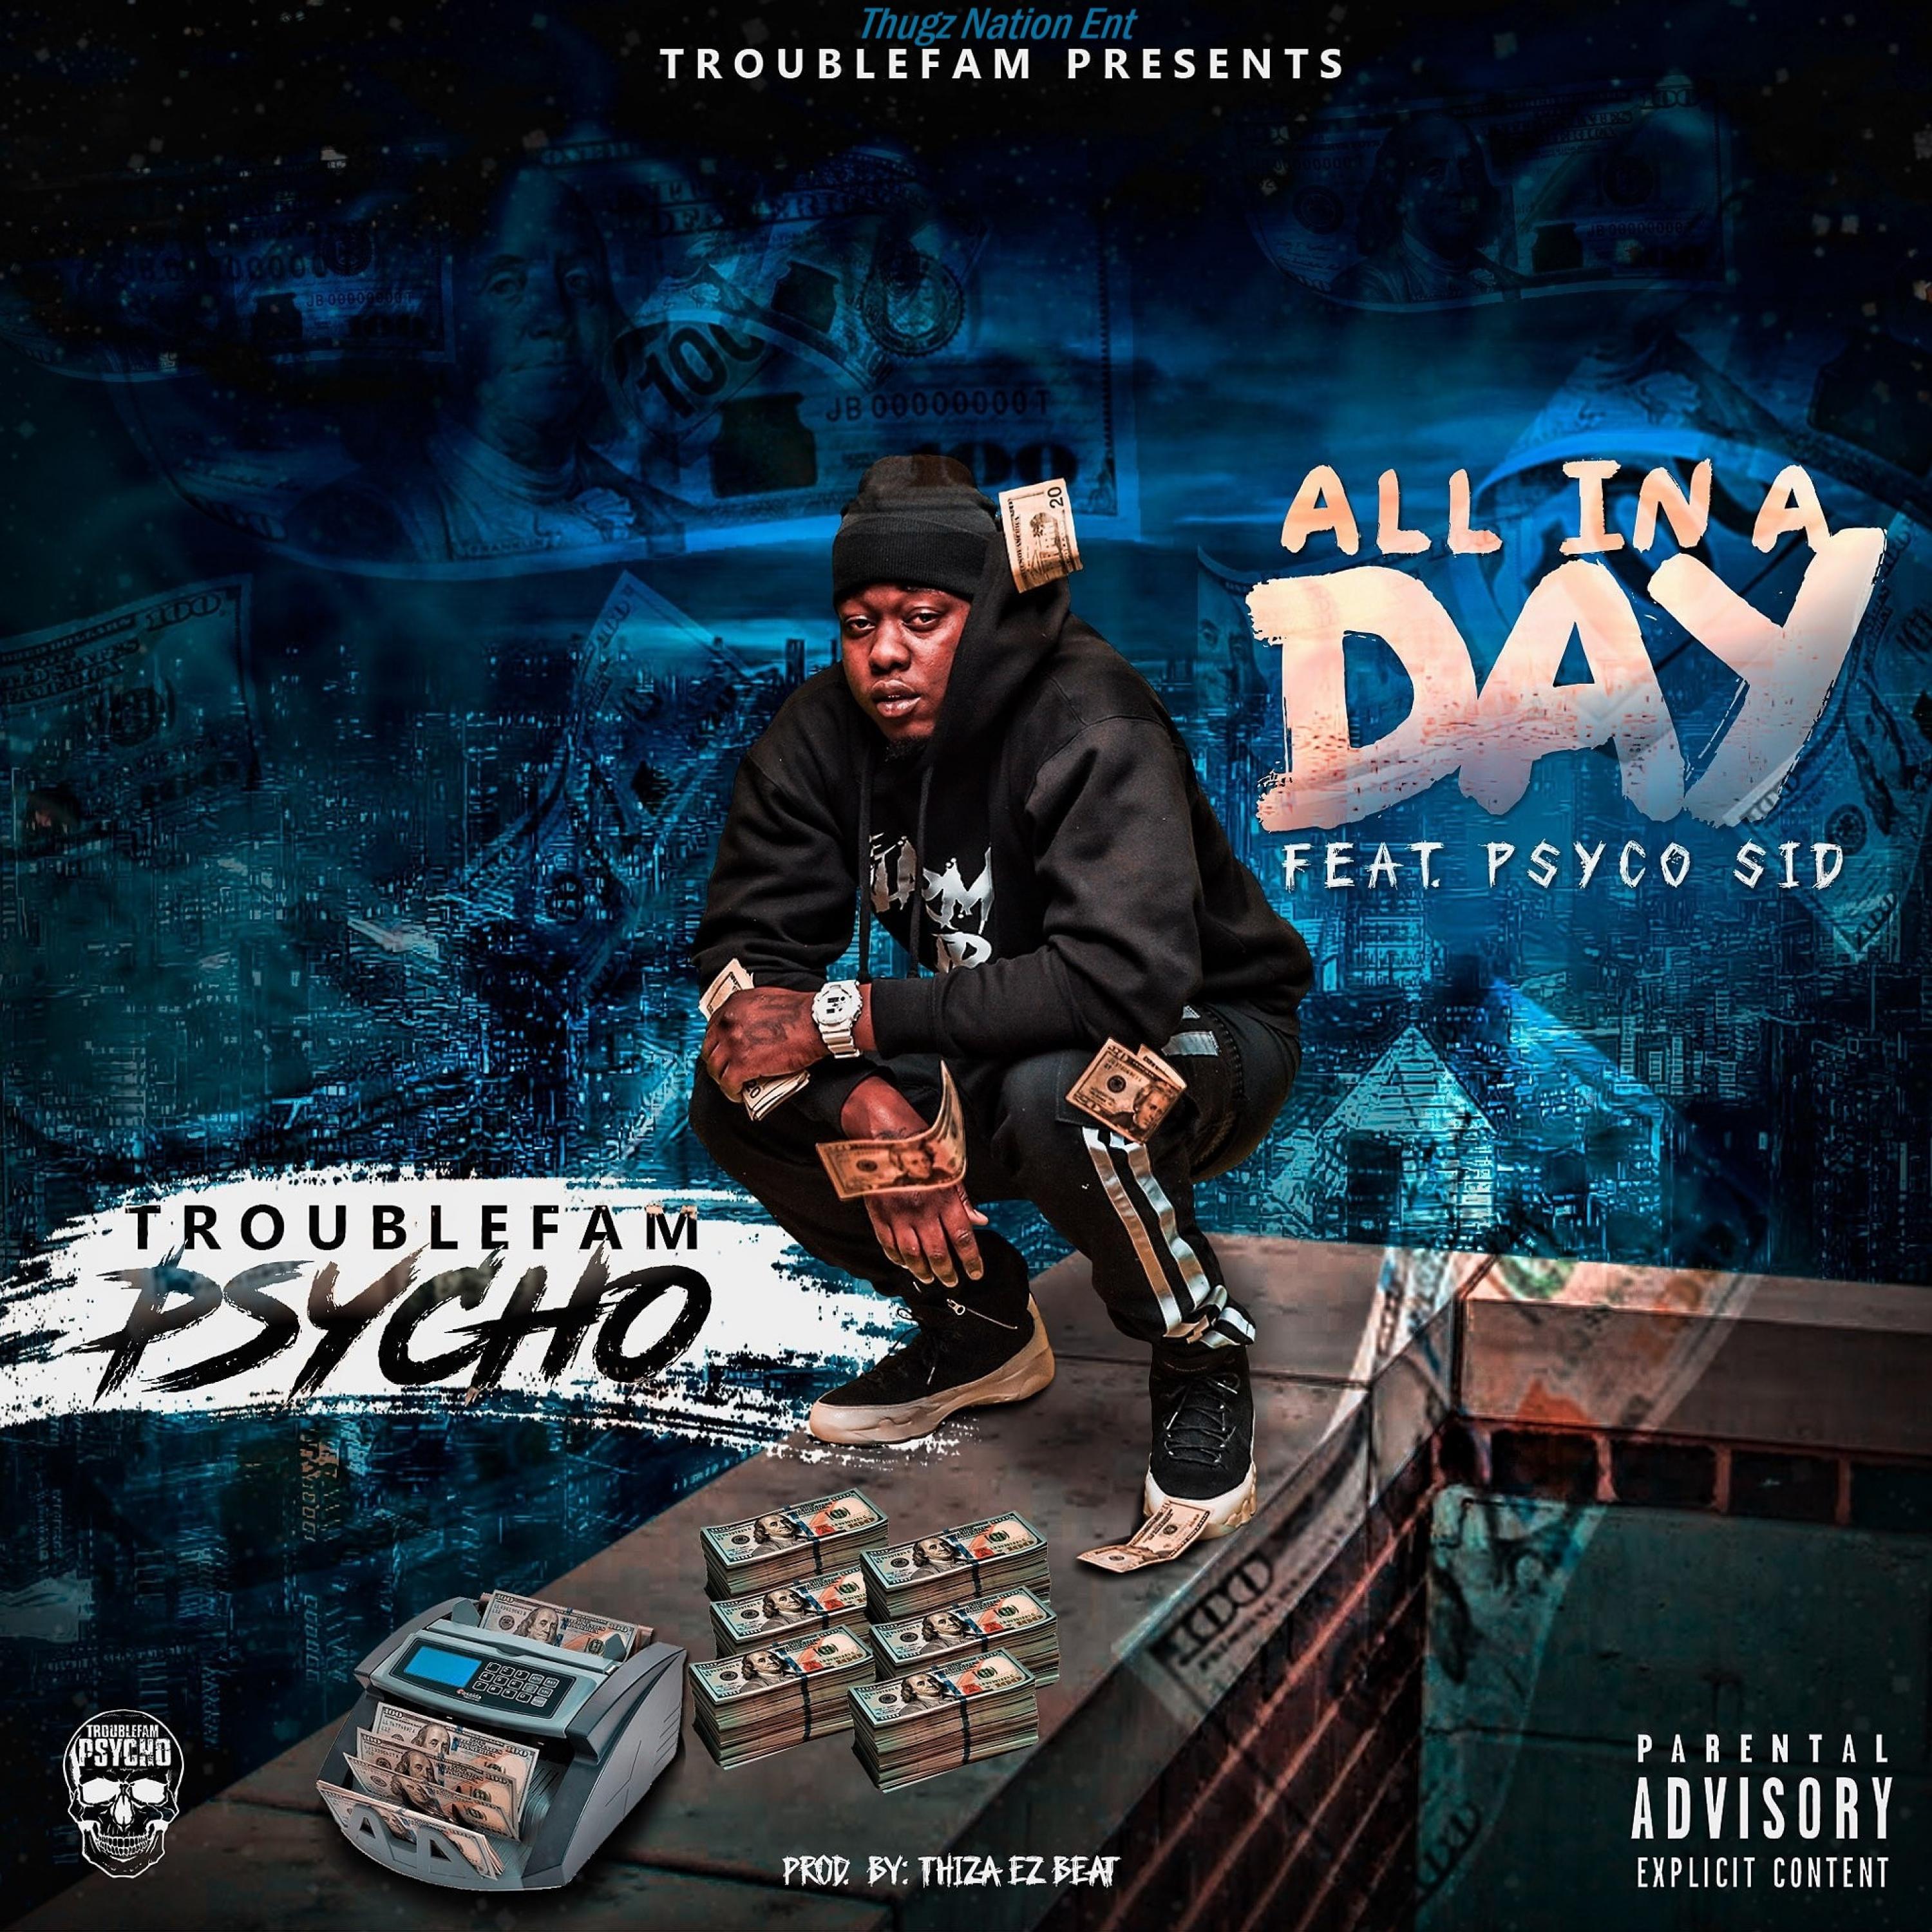 Troublefam Psycho - All in a Day